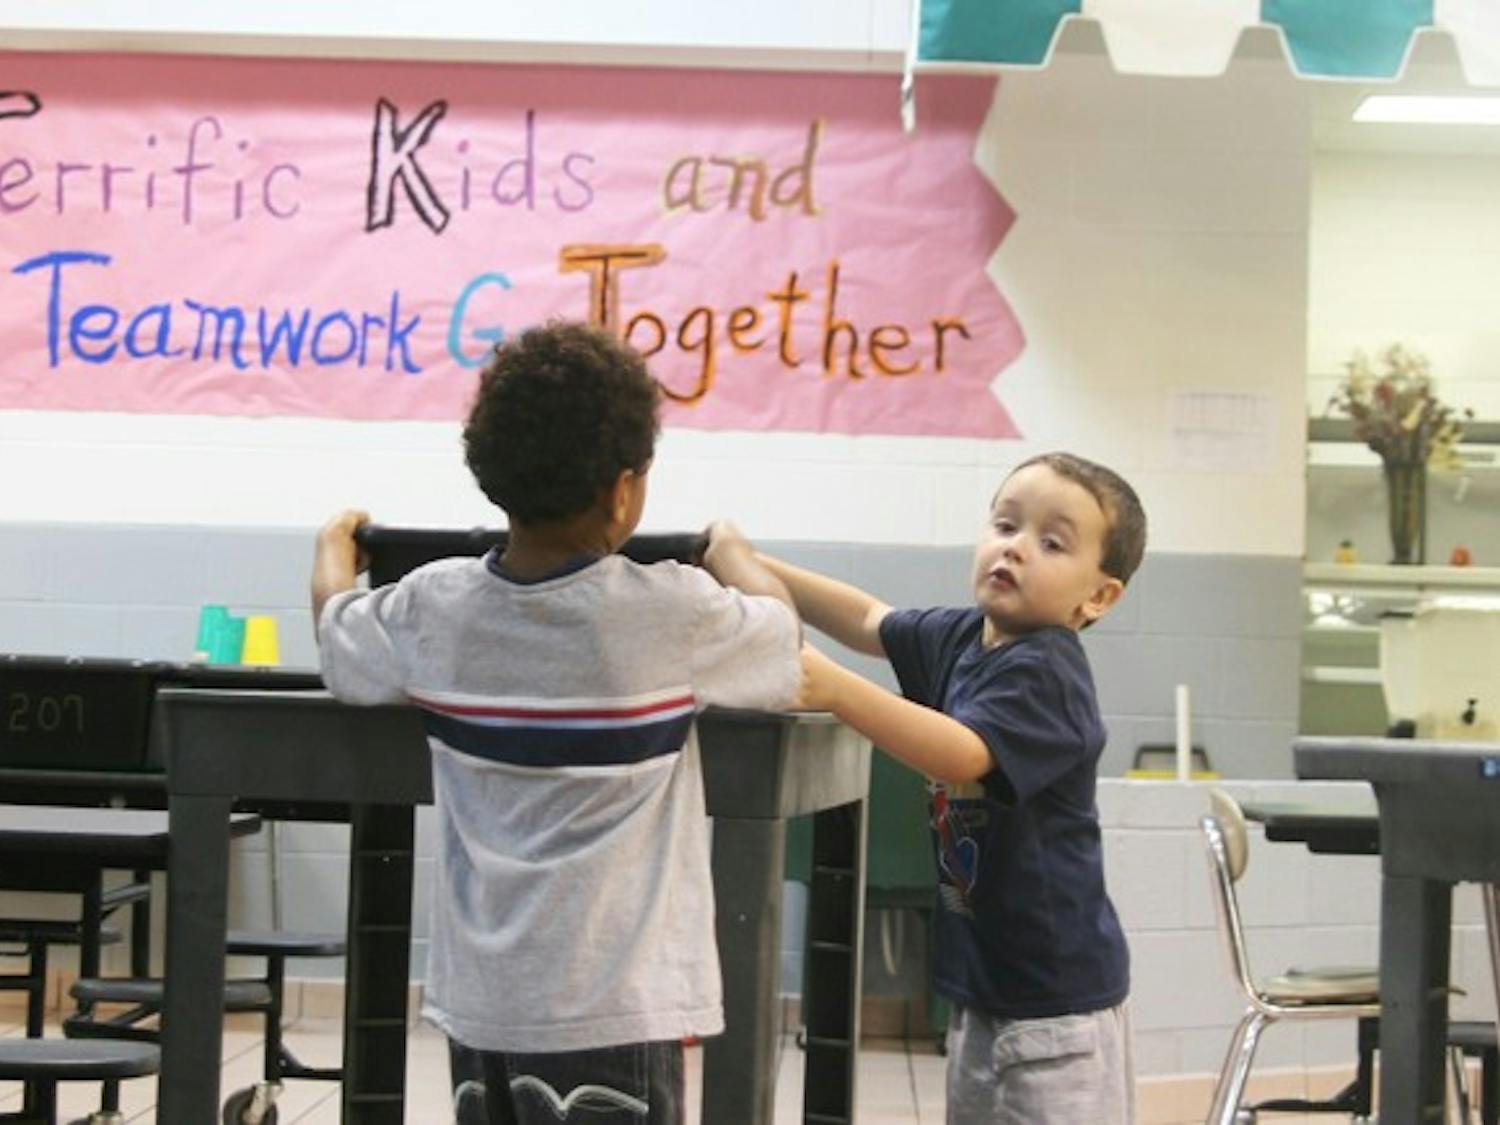 Five-year-olds Justin McCrae (left) and Cameron Morely (right) help each other carry their kindergarten class’ plastic tub back to the cafeteria after eating the day’s fruit snack.